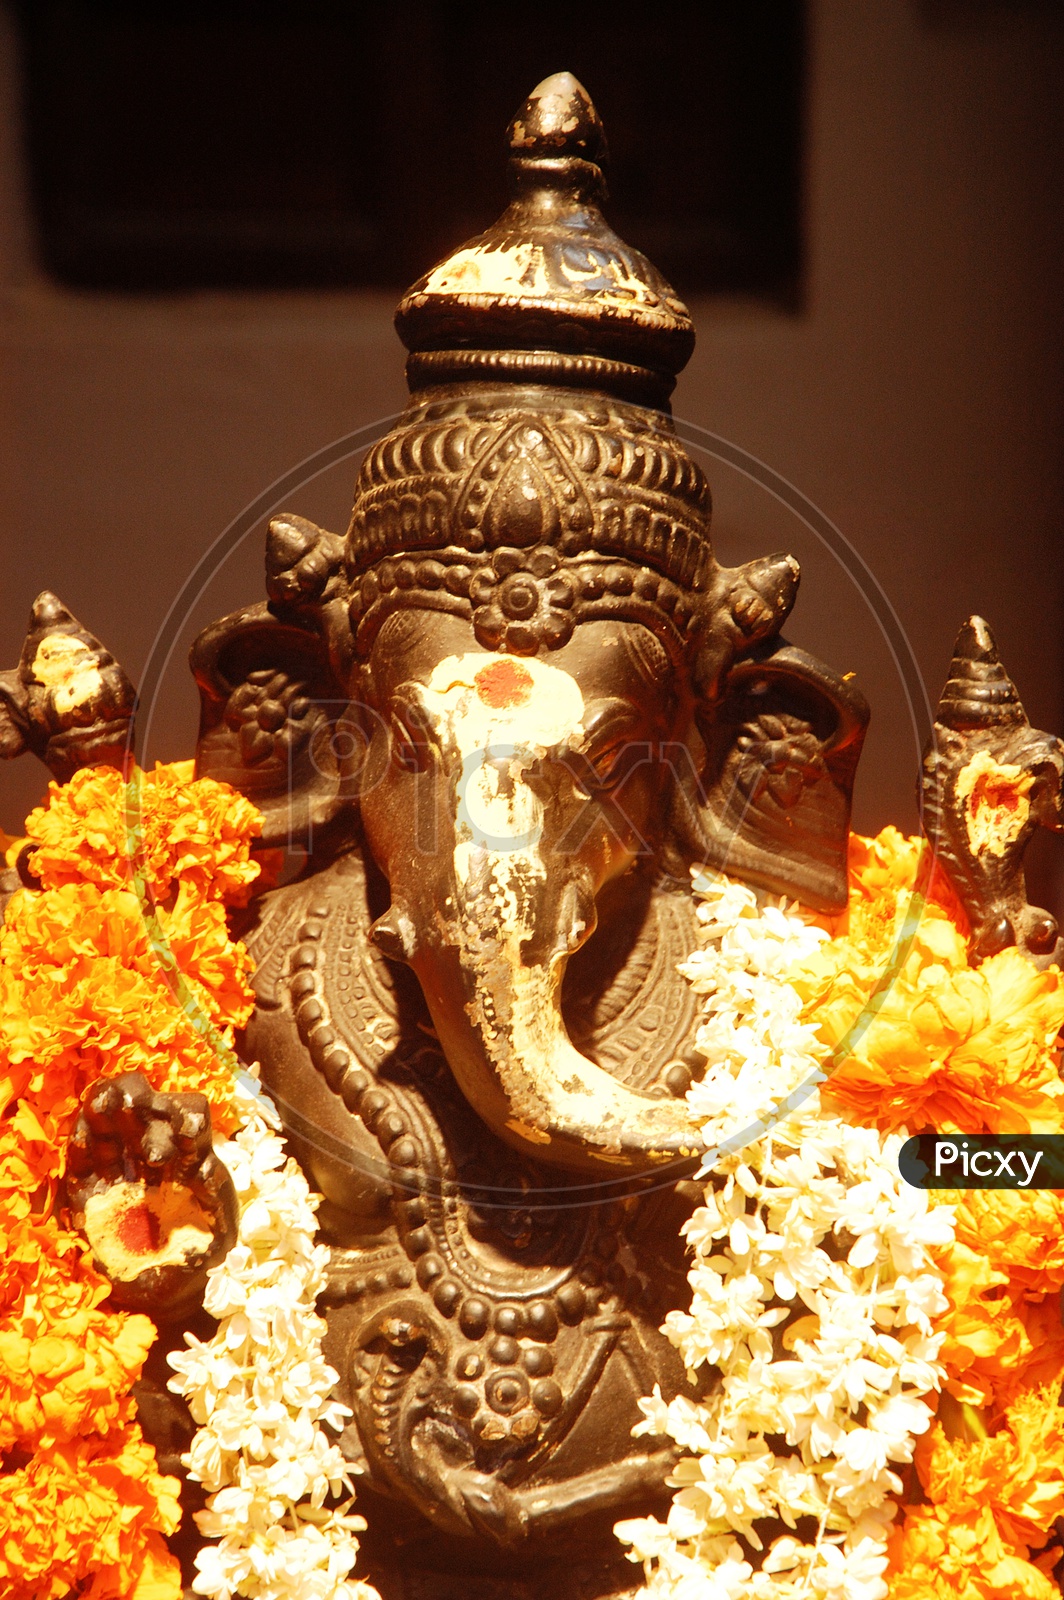 A decorated Lord Ganesha Statue